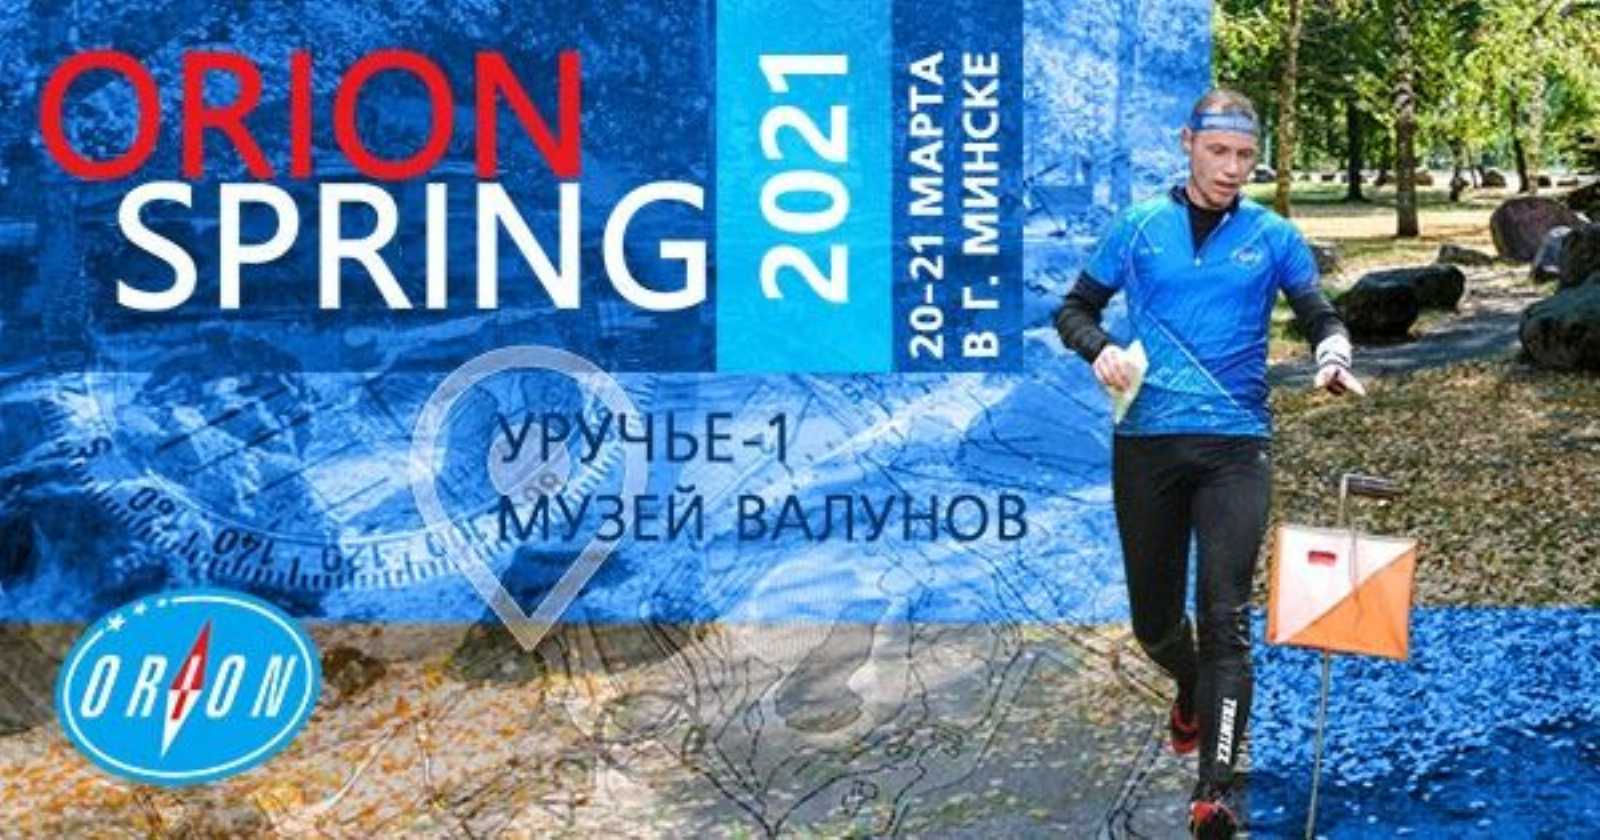 Orion spring-2021 г. Минск